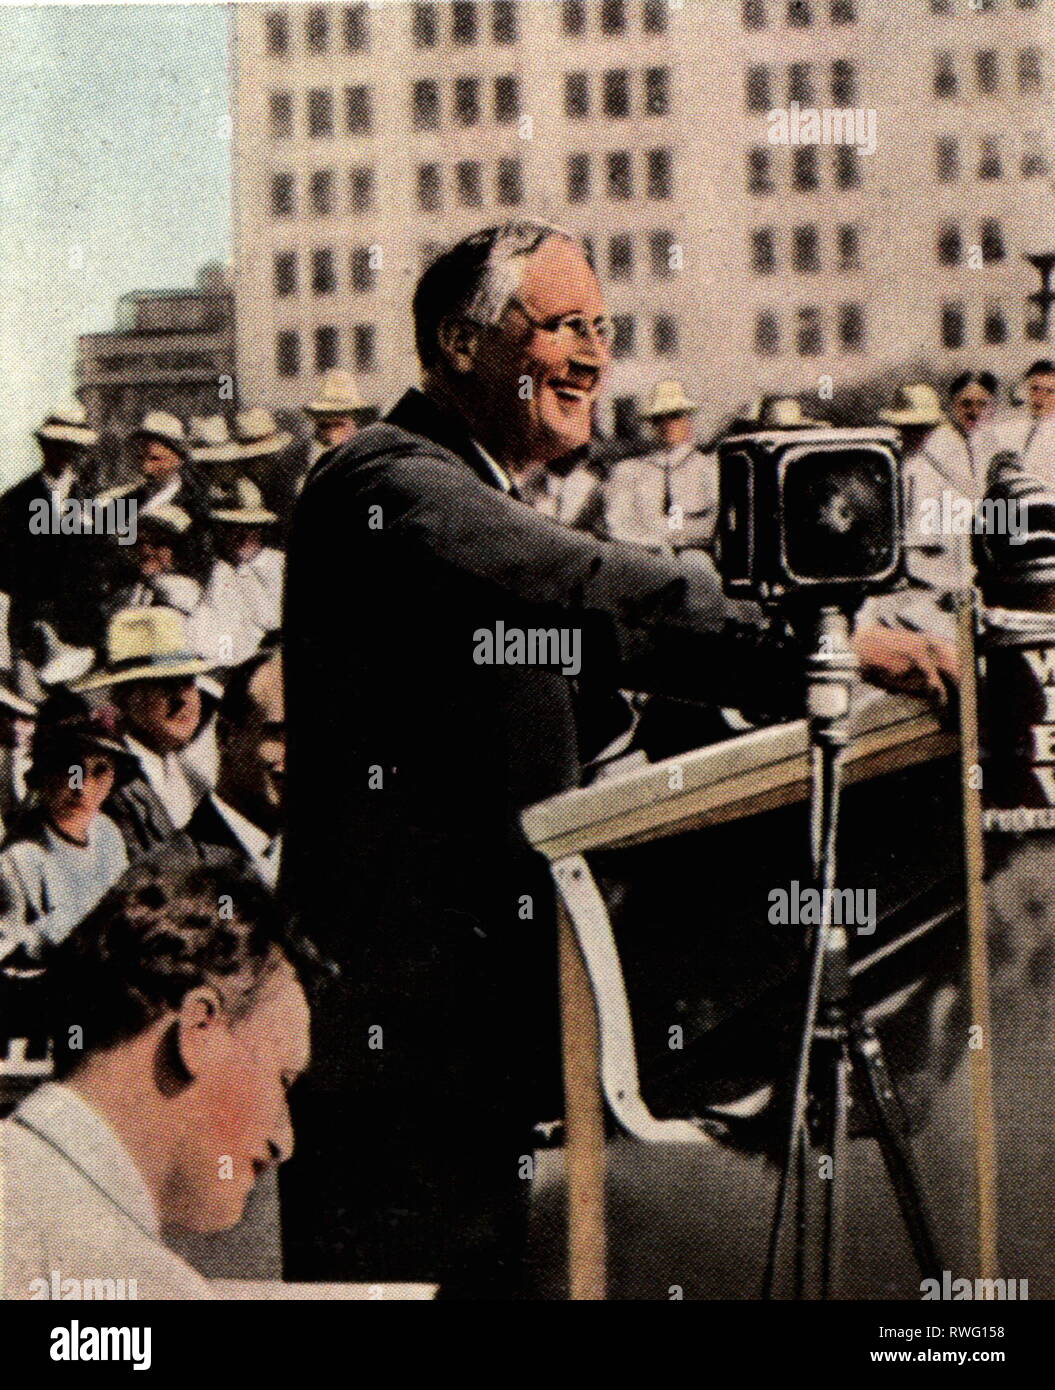 Roosevelt, Franklin Delano, 30.1.1882 - 12.4.1945, American politician (Dem.), half length, speech during of the presidential election campaign in Topeka, Kansas, 14.9.1932, coloured photograph, cigarette card, series "Die Nachkriegszeit", 1935, Additional-Rights-Clearance-Info-Not-Available Stock Photo